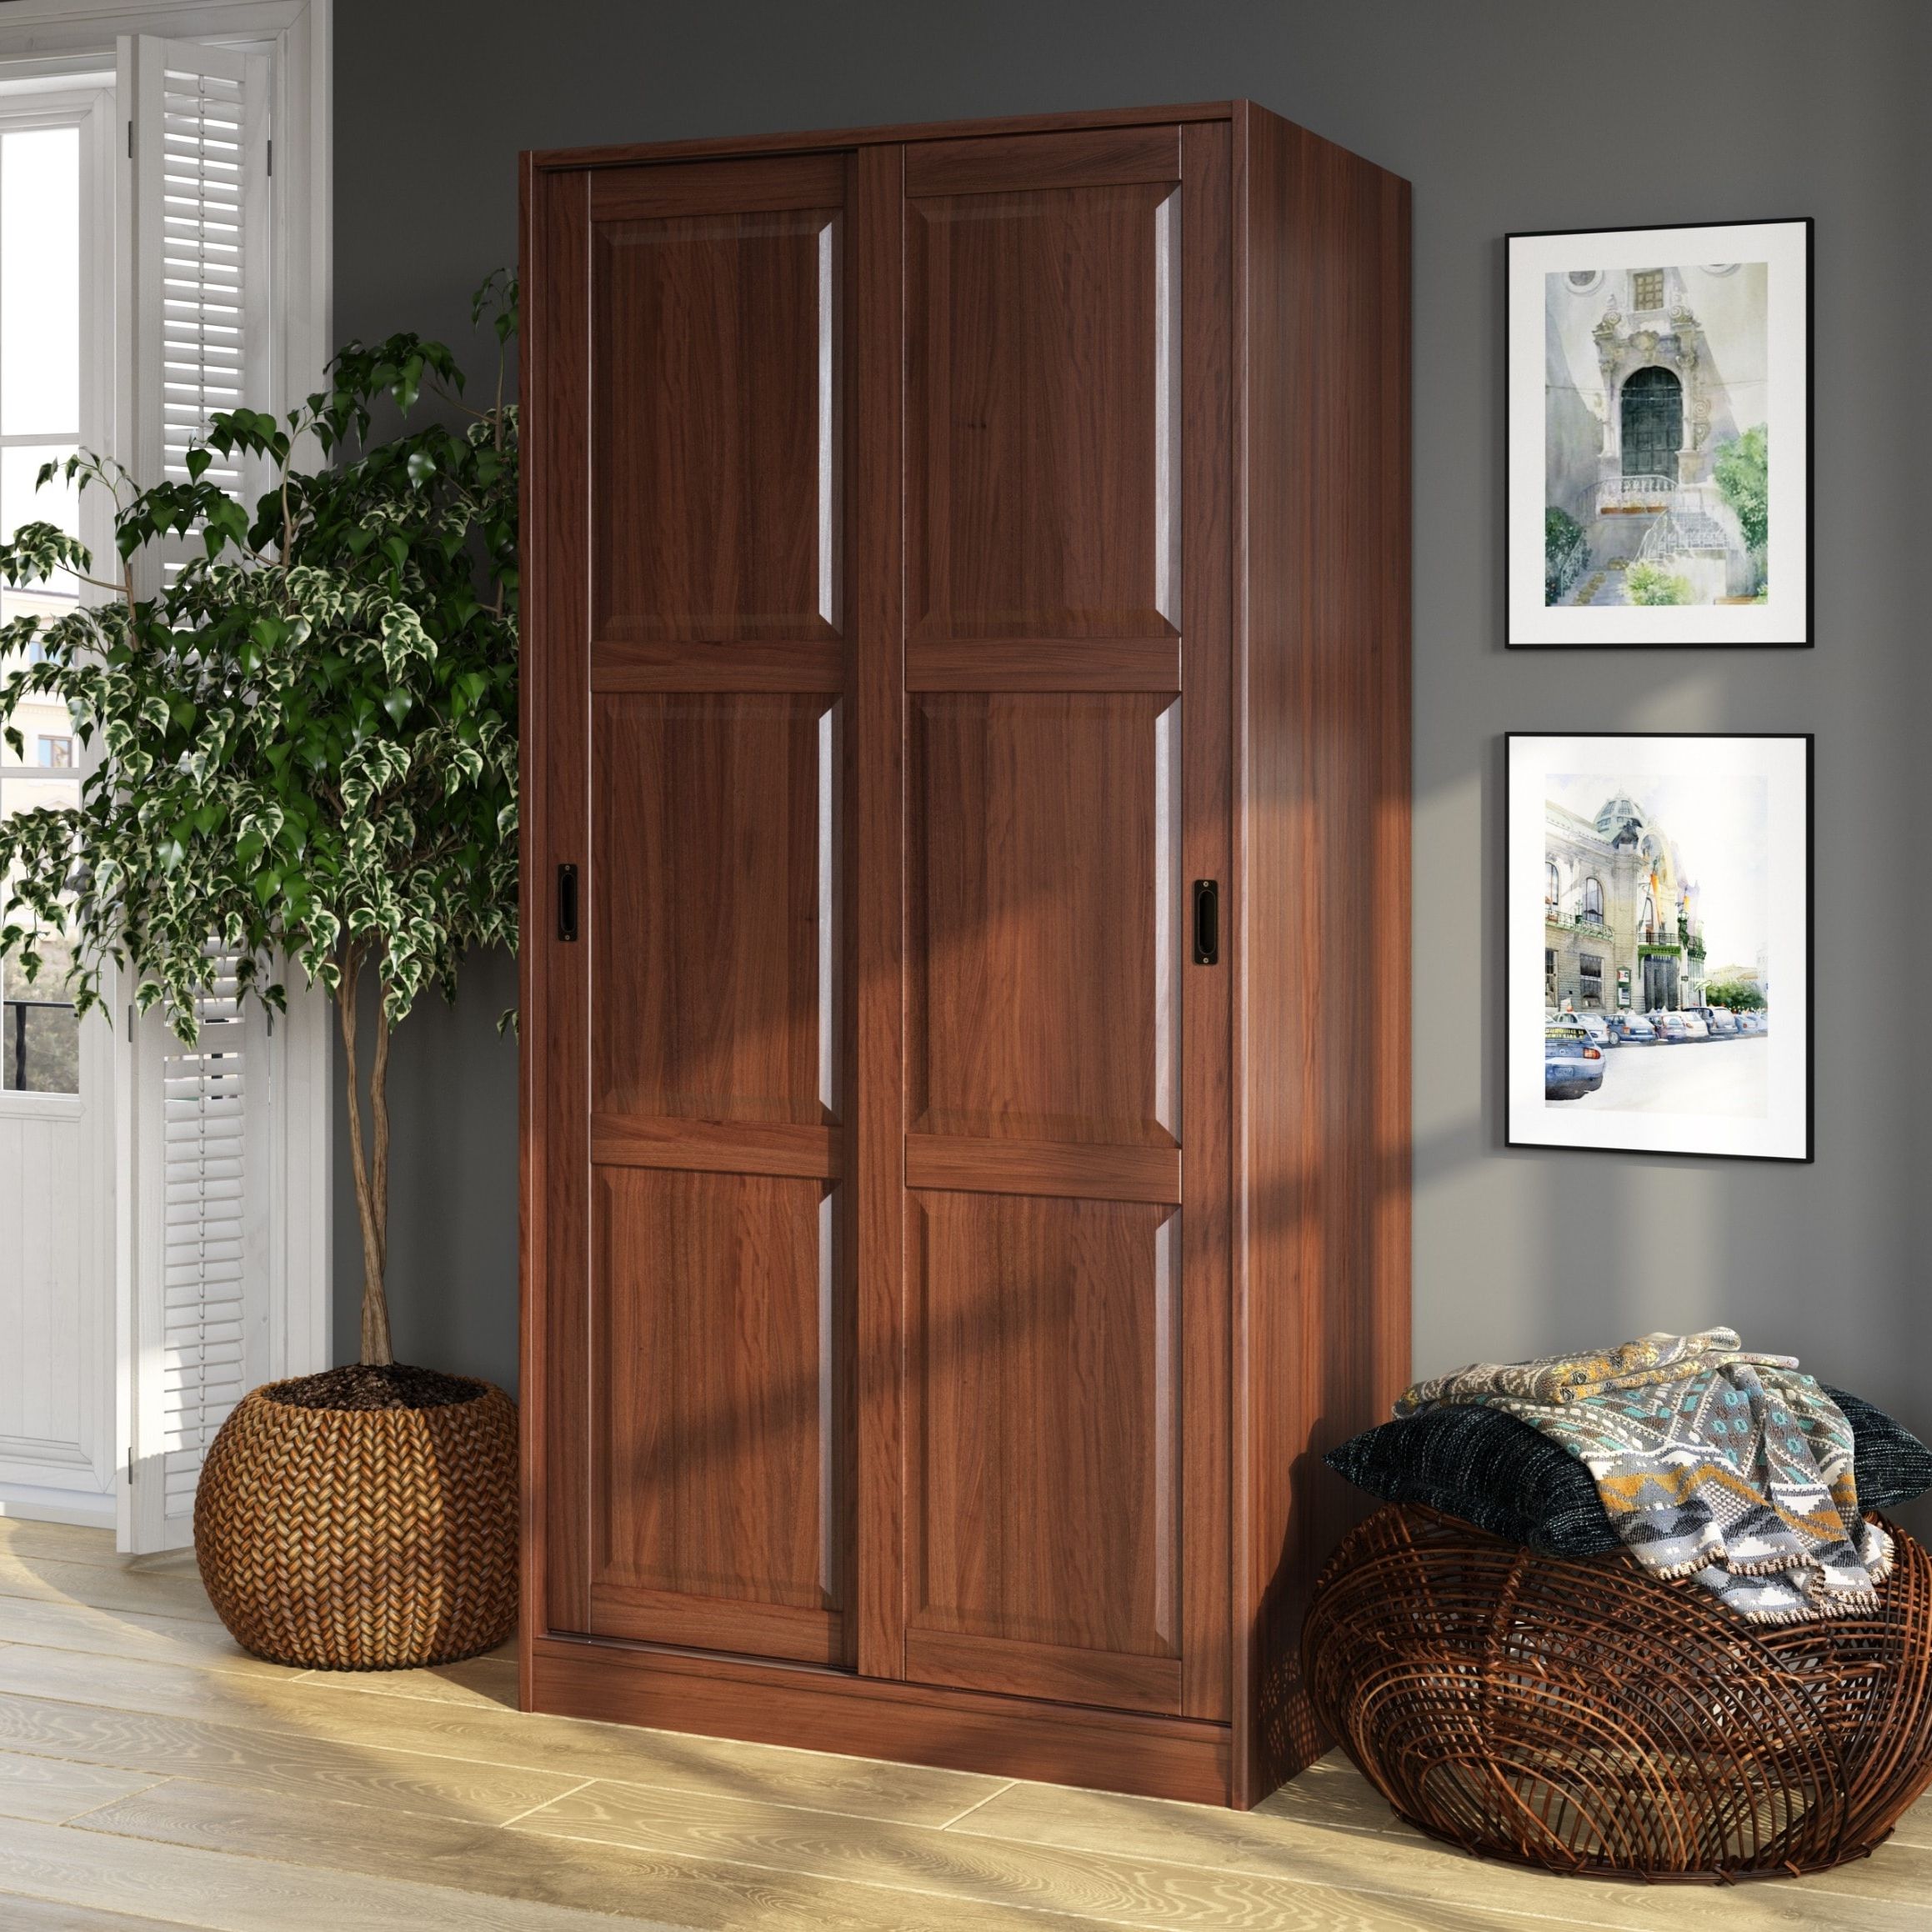 [%palace Imports 100% Solid Wood 2 Sliding Door Wardrobe Armoire With  Mirrored, Closed Louvered Or Raised Panel Doors – On Sale – Bed Bath &  Beyond – 20000830 With Regard To Preferred 2 Door Wardrobes|2 Door Wardrobes Throughout Favorite Palace Imports 100% Solid Wood 2 Sliding Door Wardrobe Armoire With  Mirrored, Closed Louvered Or Raised Panel Doors – On Sale – Bed Bath &  Beyond – 20000830|most Up To Date 2 Door Wardrobes In Palace Imports 100% Solid Wood 2 Sliding Door Wardrobe Armoire With  Mirrored, Closed Louvered Or Raised Panel Doors – On Sale – Bed Bath &  Beyond – 20000830|most Recently Released Palace Imports 100% Solid Wood 2 Sliding Door Wardrobe Armoire With  Mirrored, Closed Louvered Or Raised Panel Doors – On Sale – Bed Bath &  Beyond – 20000830 Intended For 2 Door Wardrobes%] (View 4 of 10)